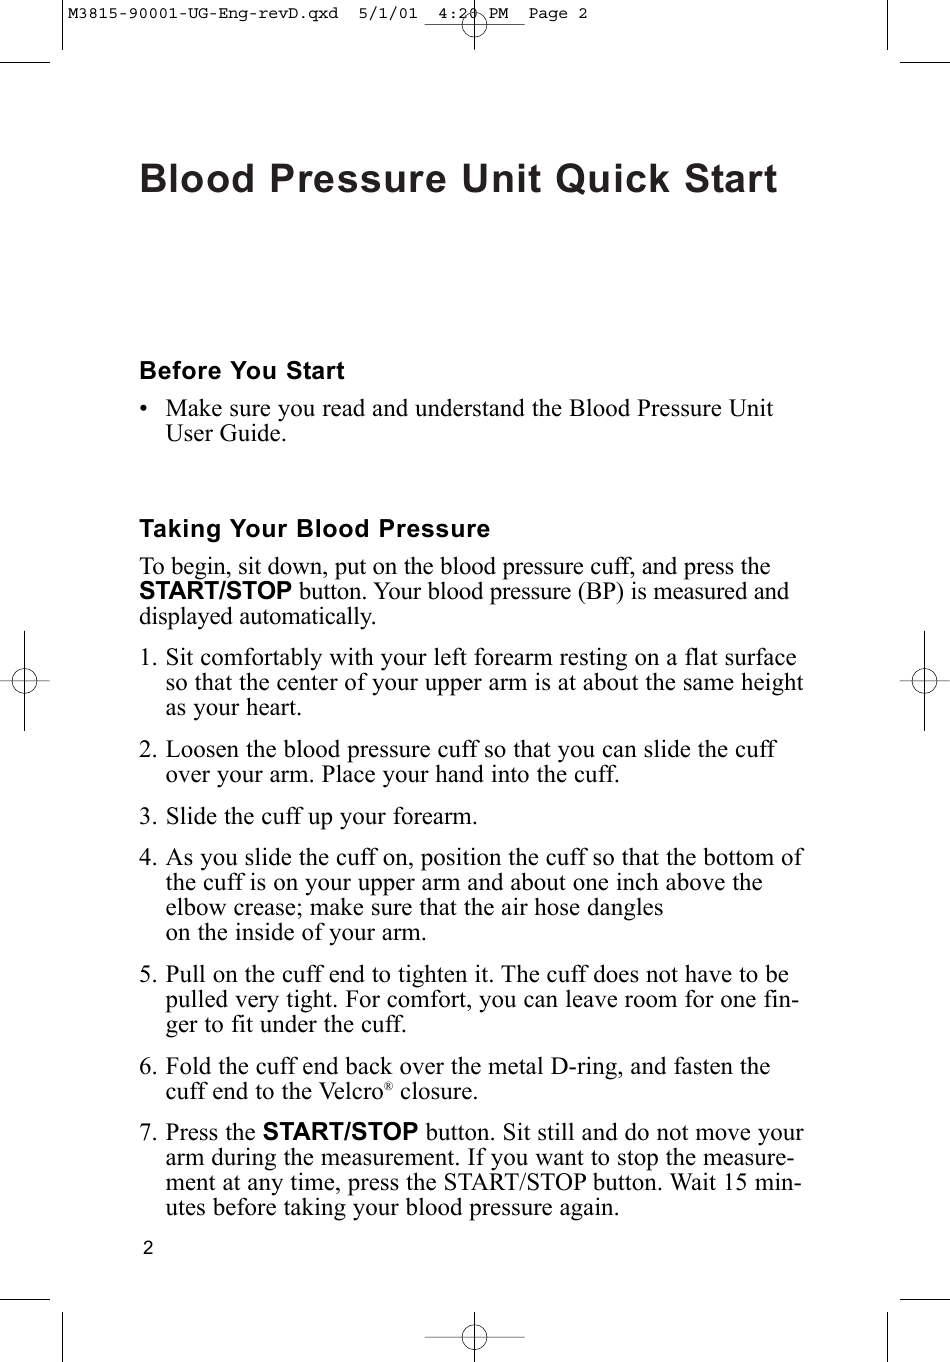 Blood Pressure Unit Quick Start2Before You Start• Make sure you read and understand the Blood Pressure UnitUser Guide.Taking Your Blood PressureTo begin, sit down, put on the blood pressure cuff, and press theSTART/STOP button. Your blood pressure (BP) is measured anddisplayed automatically.1. Sit comfortably with your left forearm resting on a flat surfaceso that the center of your upper arm is at about the same heightas your heart. 2. Loosen the blood pressure cuff so that you can slide the cuffover your arm. Place your hand into the cuff.3. Slide the cuff up your forearm.4. As you slide the cuff on, position the cuff so that the bottom ofthe cuff is on your upper arm and about one inch above theelbow crease; make sure that the air hose dangleson the inside of your arm.5. Pull on the cuff end to tighten it. The cuff does not have to bepulled very tight. For comfort, you can leave room for one fin-ger to fit under the cuff.6. Fold the cuff end back over the metal D-ring, and fasten thecuff end to the Velcro®closure.7. Press the START/STOP button. Sit still and do not move yourarm during the measurement. If you want to stop the measure-ment at any time, press the START/STOP button. Wait 15 min-utes before taking your blood pressure again.M3815-90001-UG-Eng-revD.qxd  5/1/01  4:20 PM  Page 2